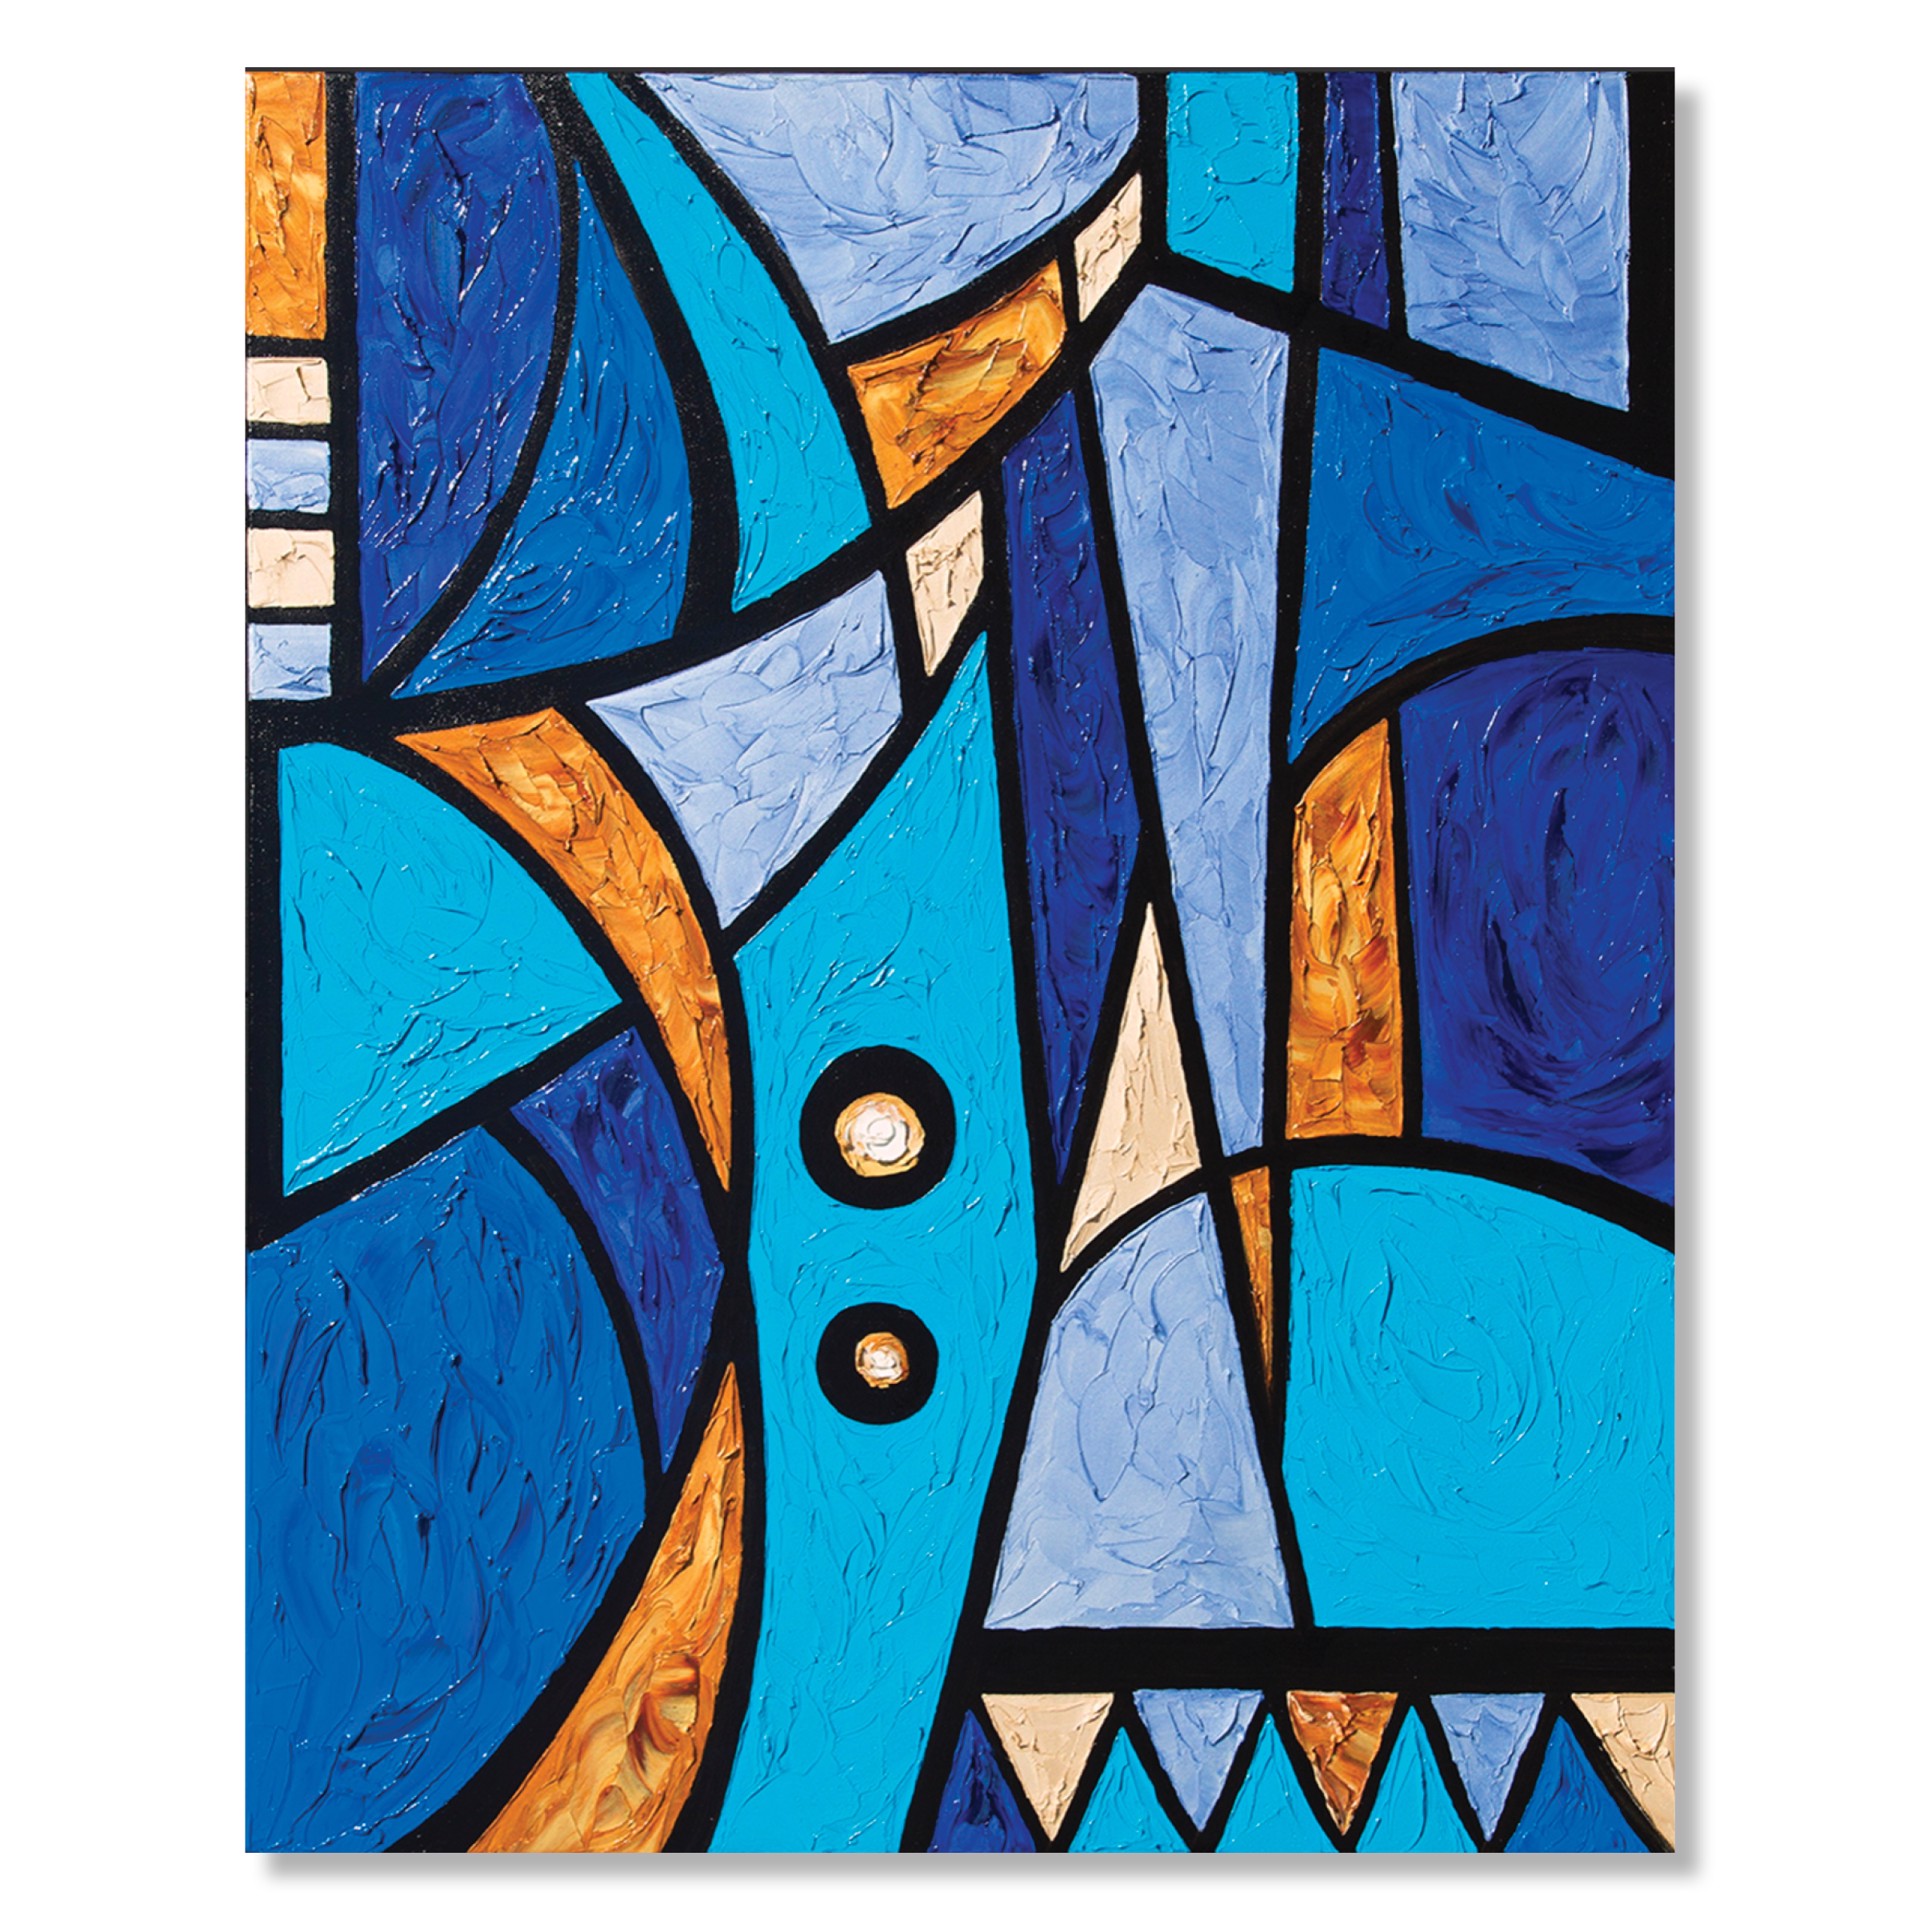 If Picasso Dreamed in Blue by JD Miller